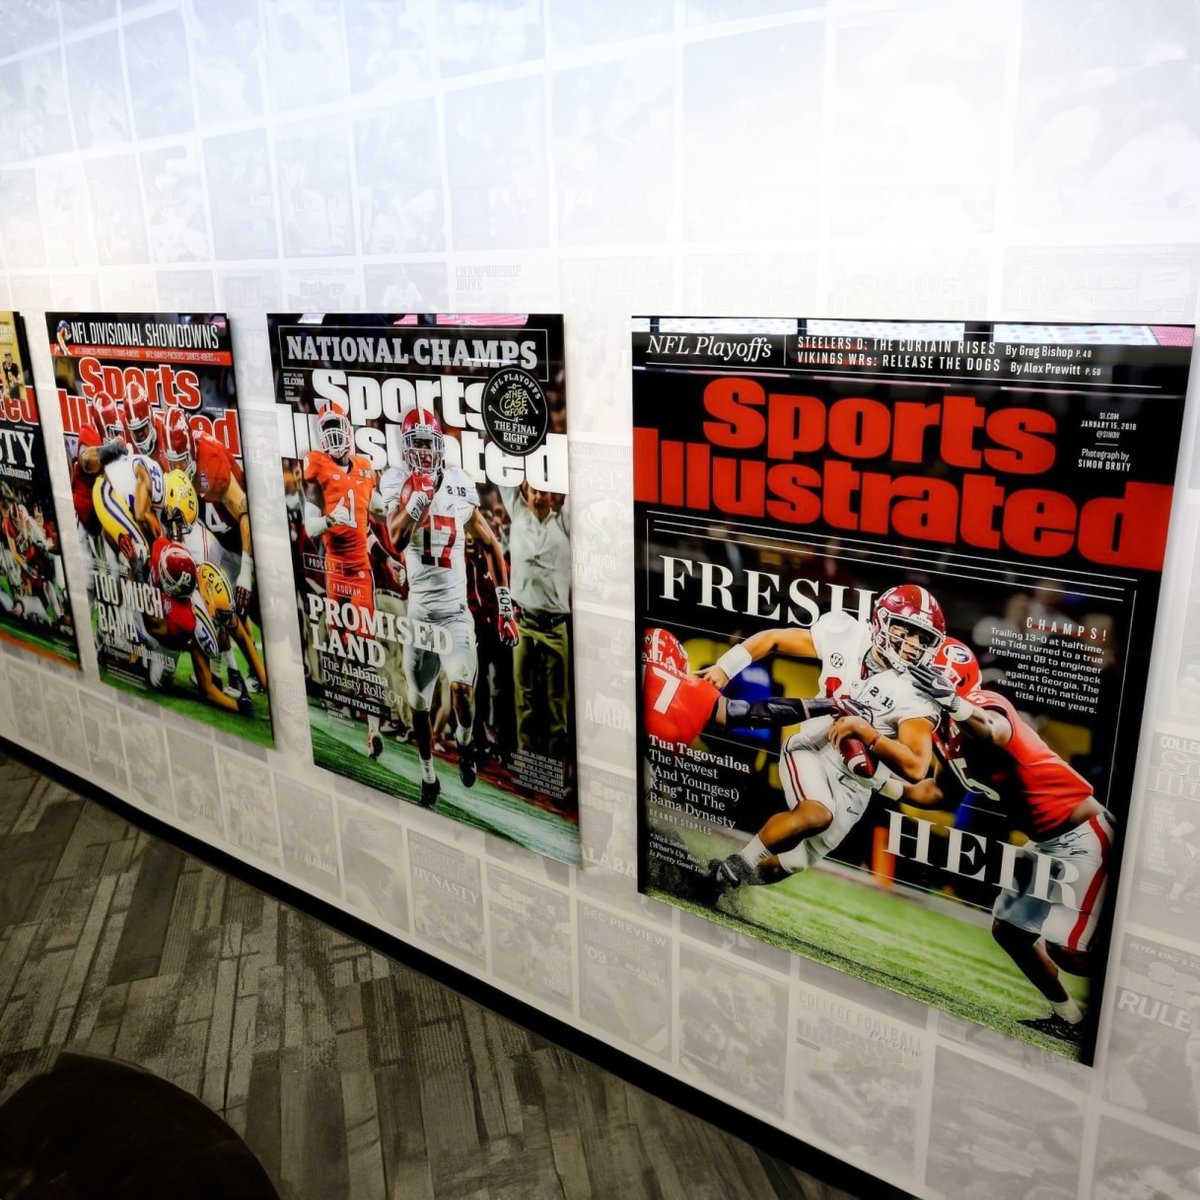 BREAKING: The Arena Group has given notice that it intends to lay off Sports Illustrated’s entire staff, according to an email obtained by FOS.